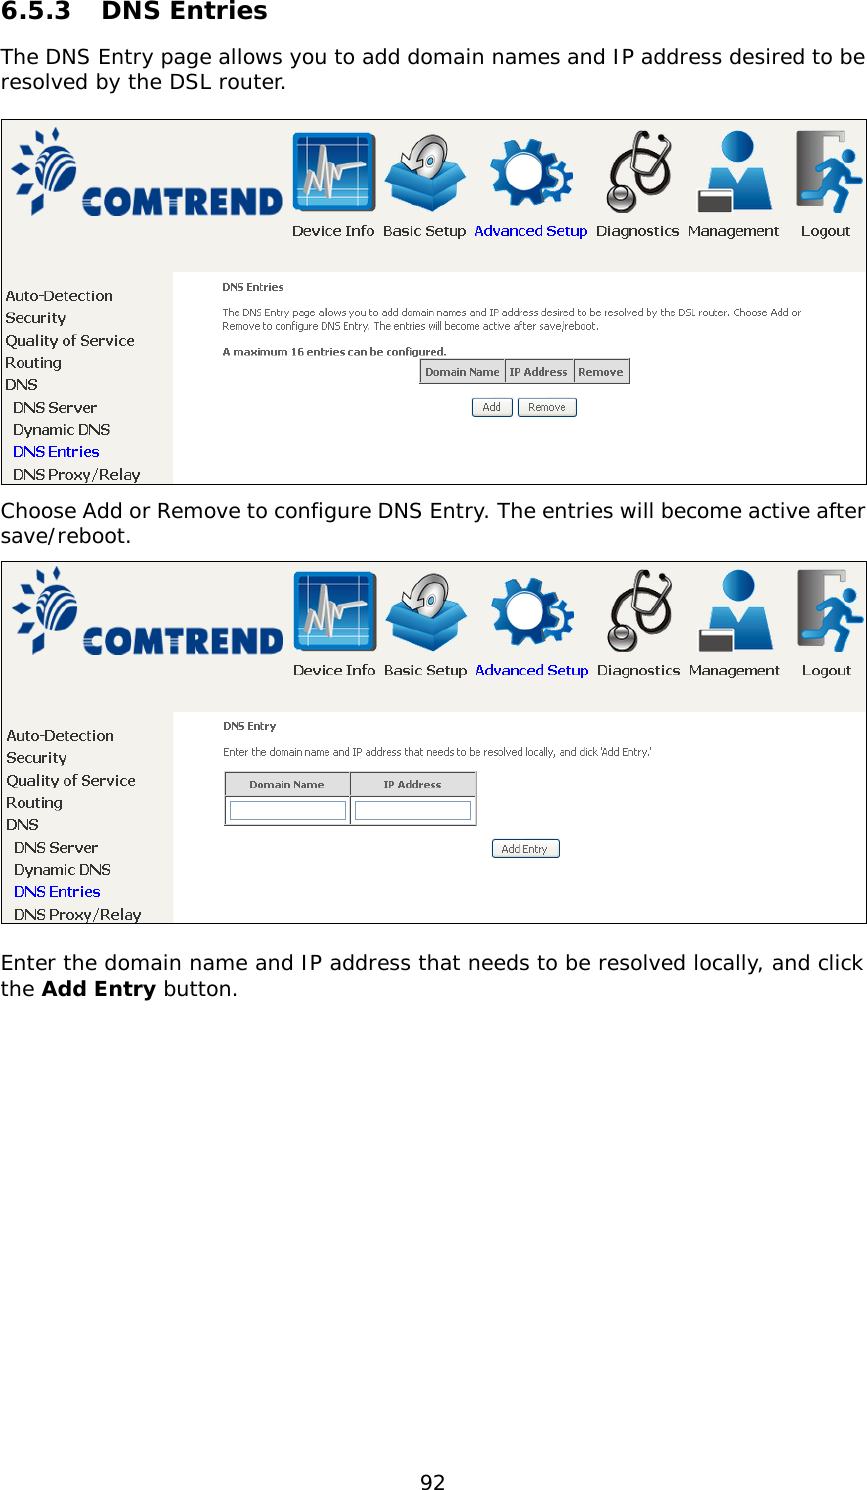  92 6.5.3  DNS Entries The DNS Entry page allows you to add domain names and IP address desired to be resolved by the DSL router.    Choose Add or Remove to configure DNS Entry. The entries will become active after save/reboot.   Enter the domain name and IP address that needs to be resolved locally, and click the Add Entry button.  